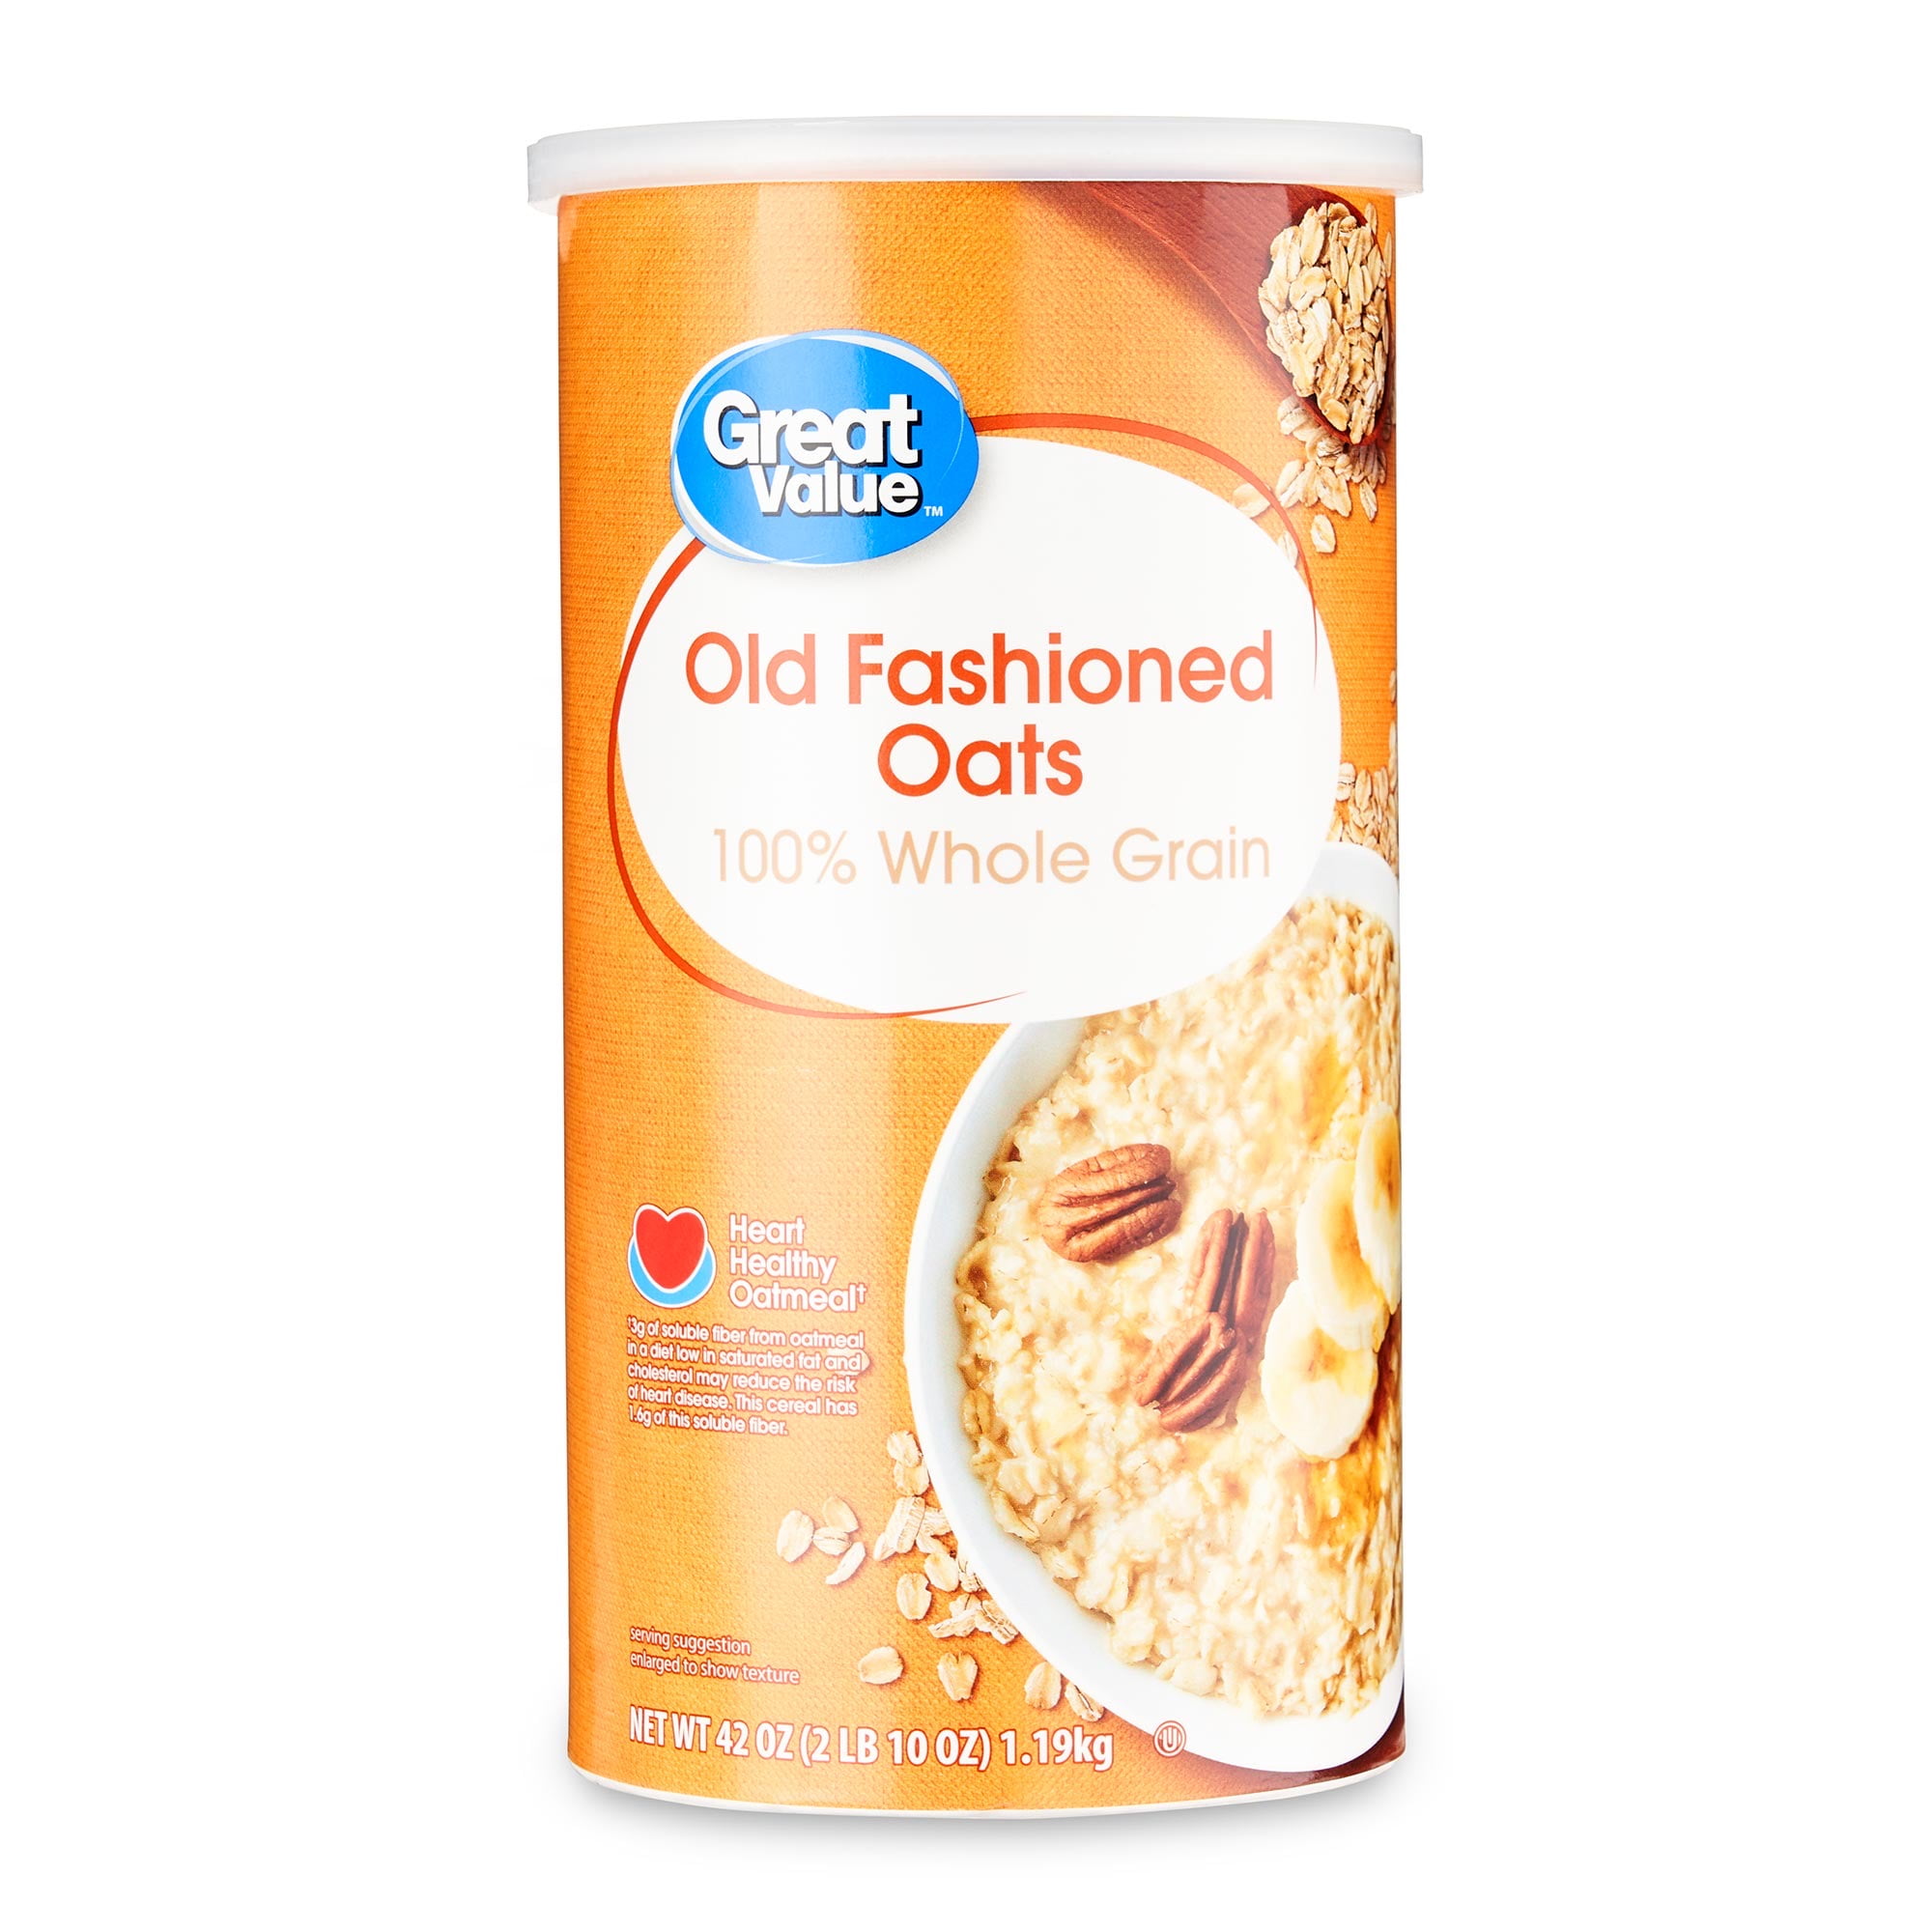 Old Fashioned Oats, Quick Oats, Snacks